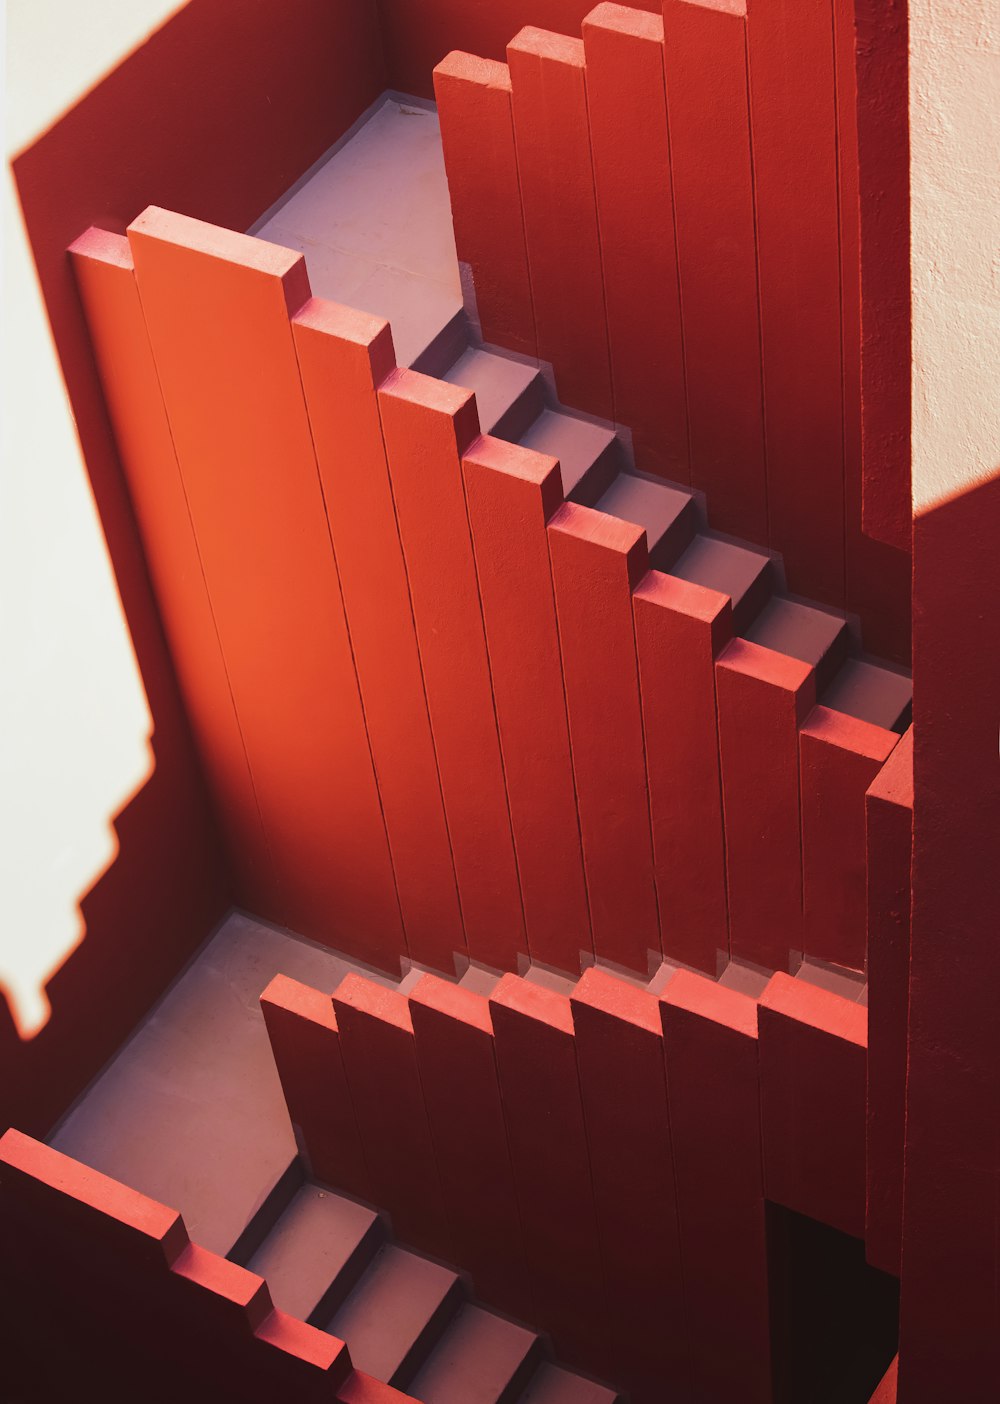 a close up of a staircase made out of red blocks